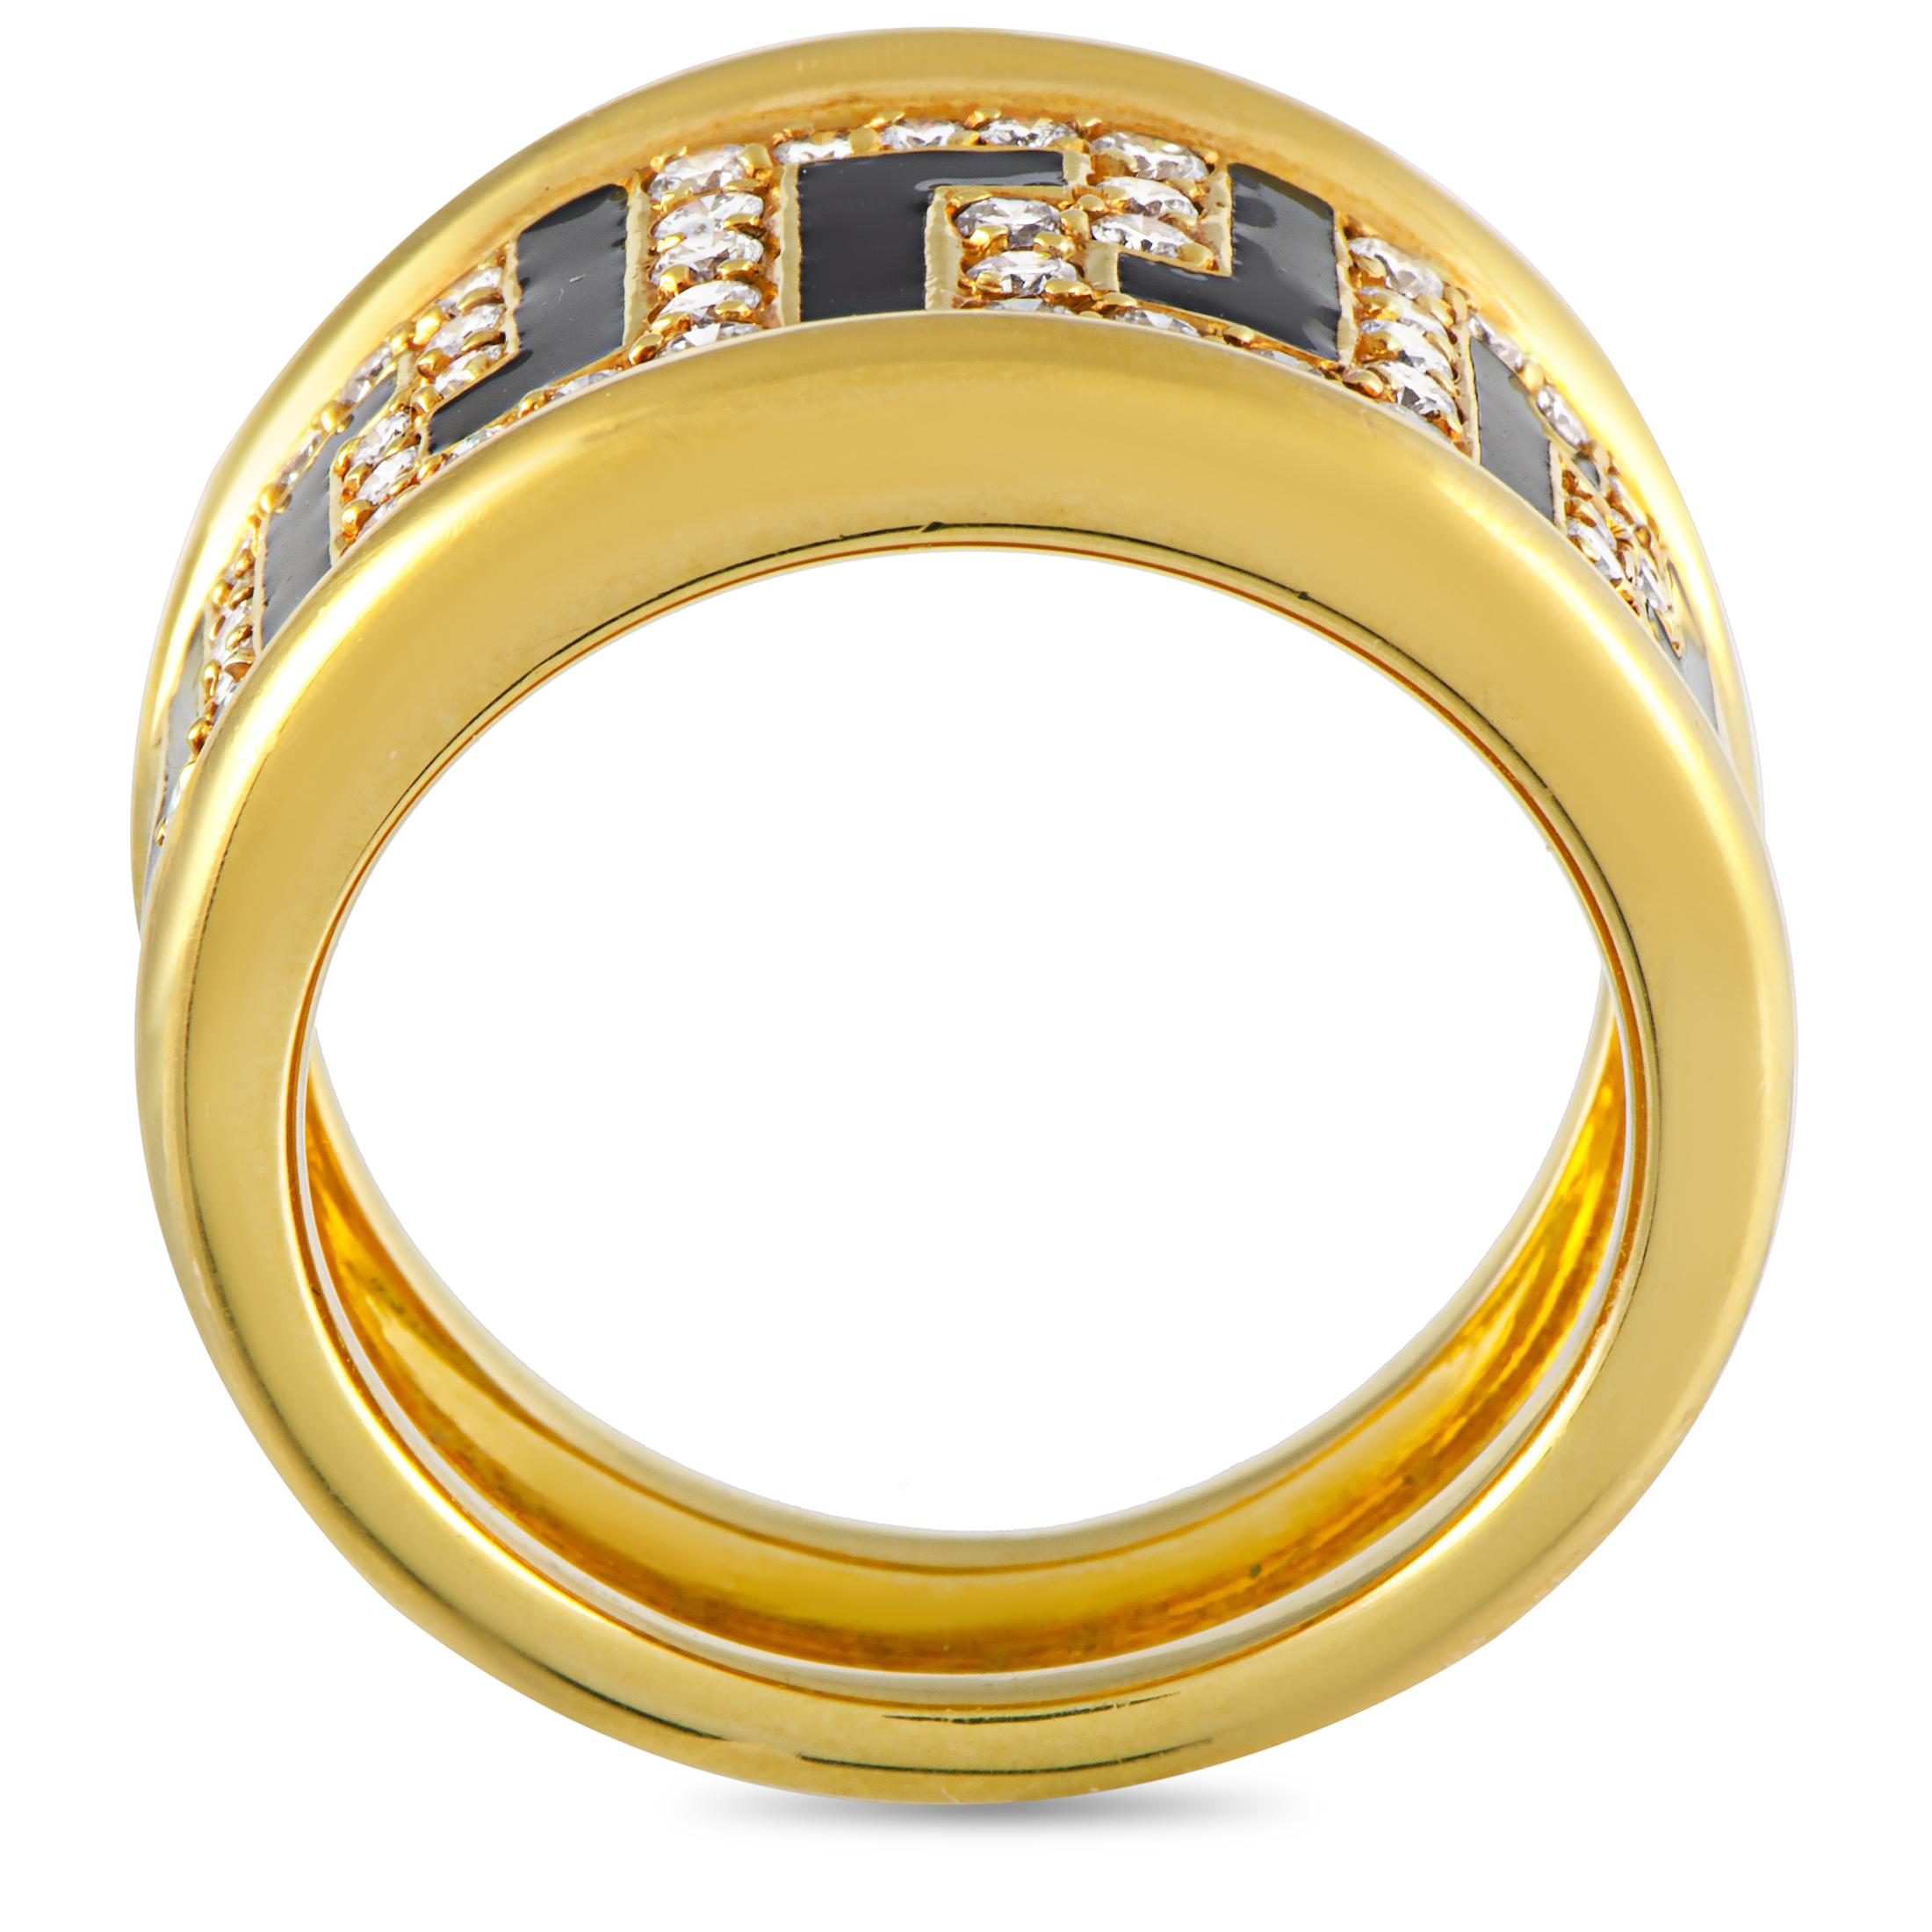 This Versace ring is made out of 18K yellow gold and enamel and set with a total of 0.75 carats of diamonds. The ring weighs 13.7 grams, boasting band thickness of 10 mm and top height of 4 mm, while top dimensions measure 13 by 21 mm.
This item